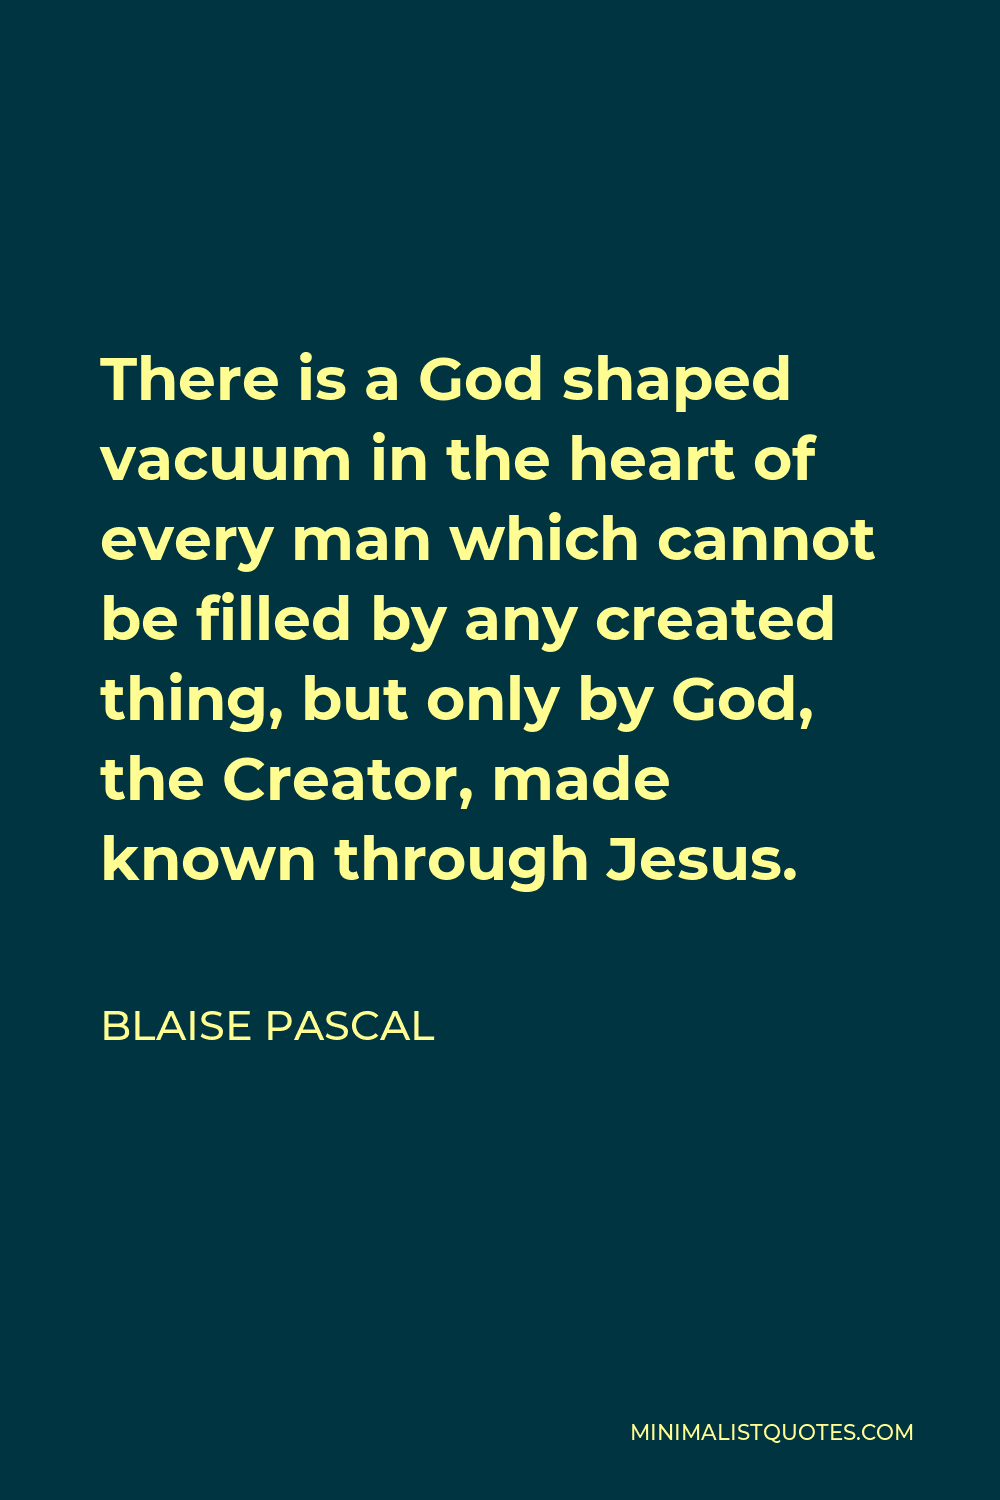 Blaise Pascal Quote - There is a God shaped vacuum in the heart of every man which cannot be filled by any created thing, but only by God, the Creator, made known through Jesus.